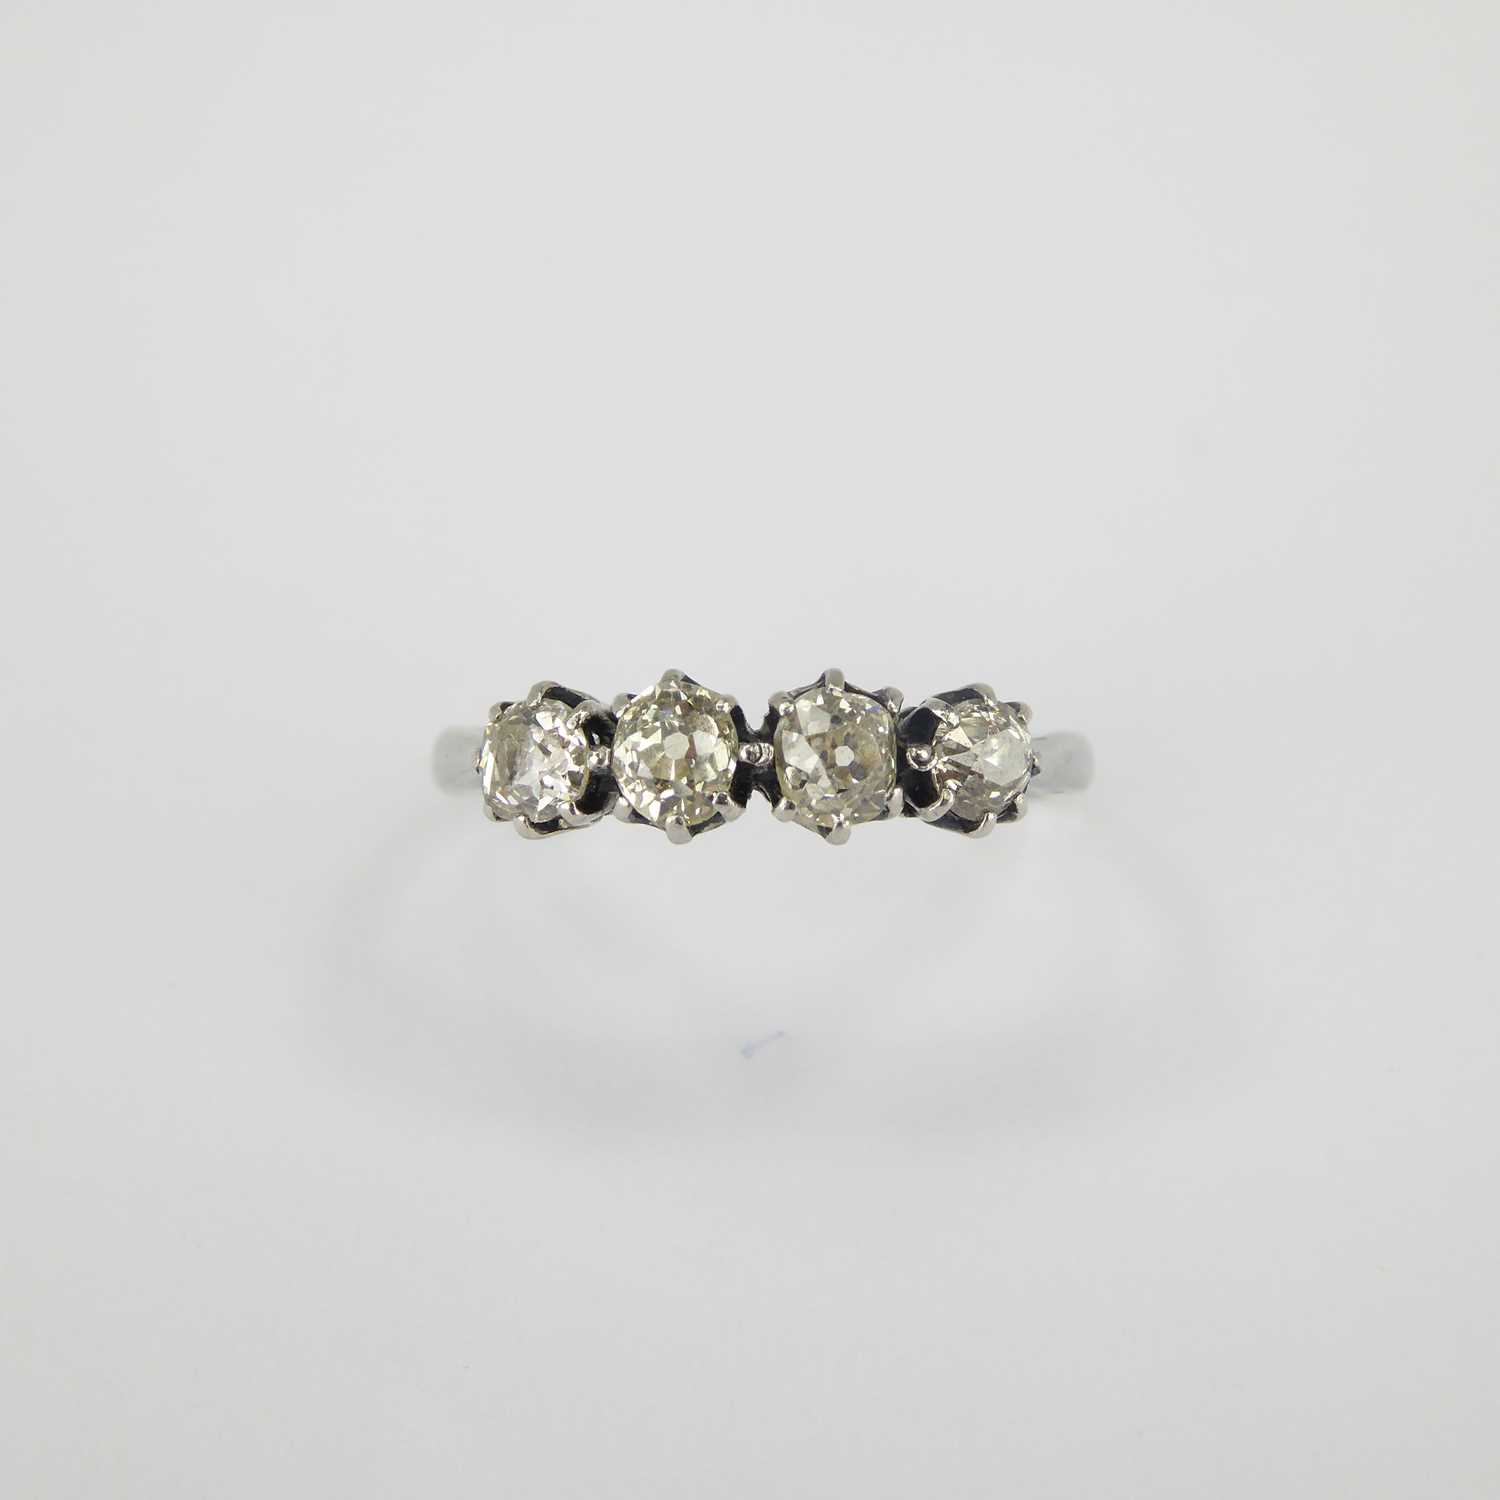 An 18ct white gold ring, the head set with four claw set rose cut diamonds with a slight tinge of - Image 2 of 3